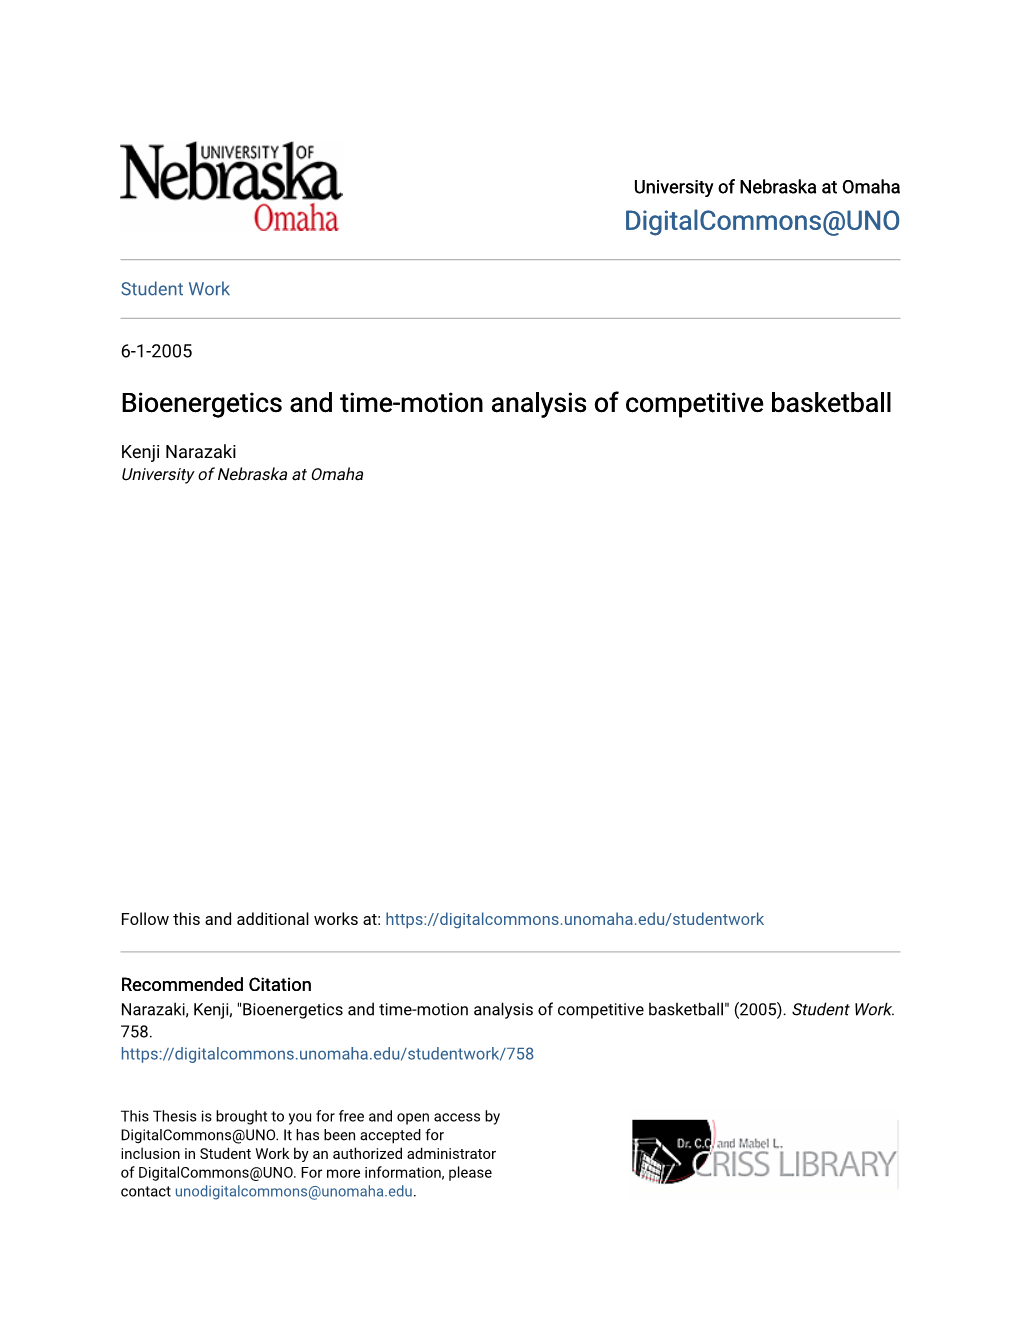 Bioenergetics and Time-Motion Analysis of Competitive Basketball